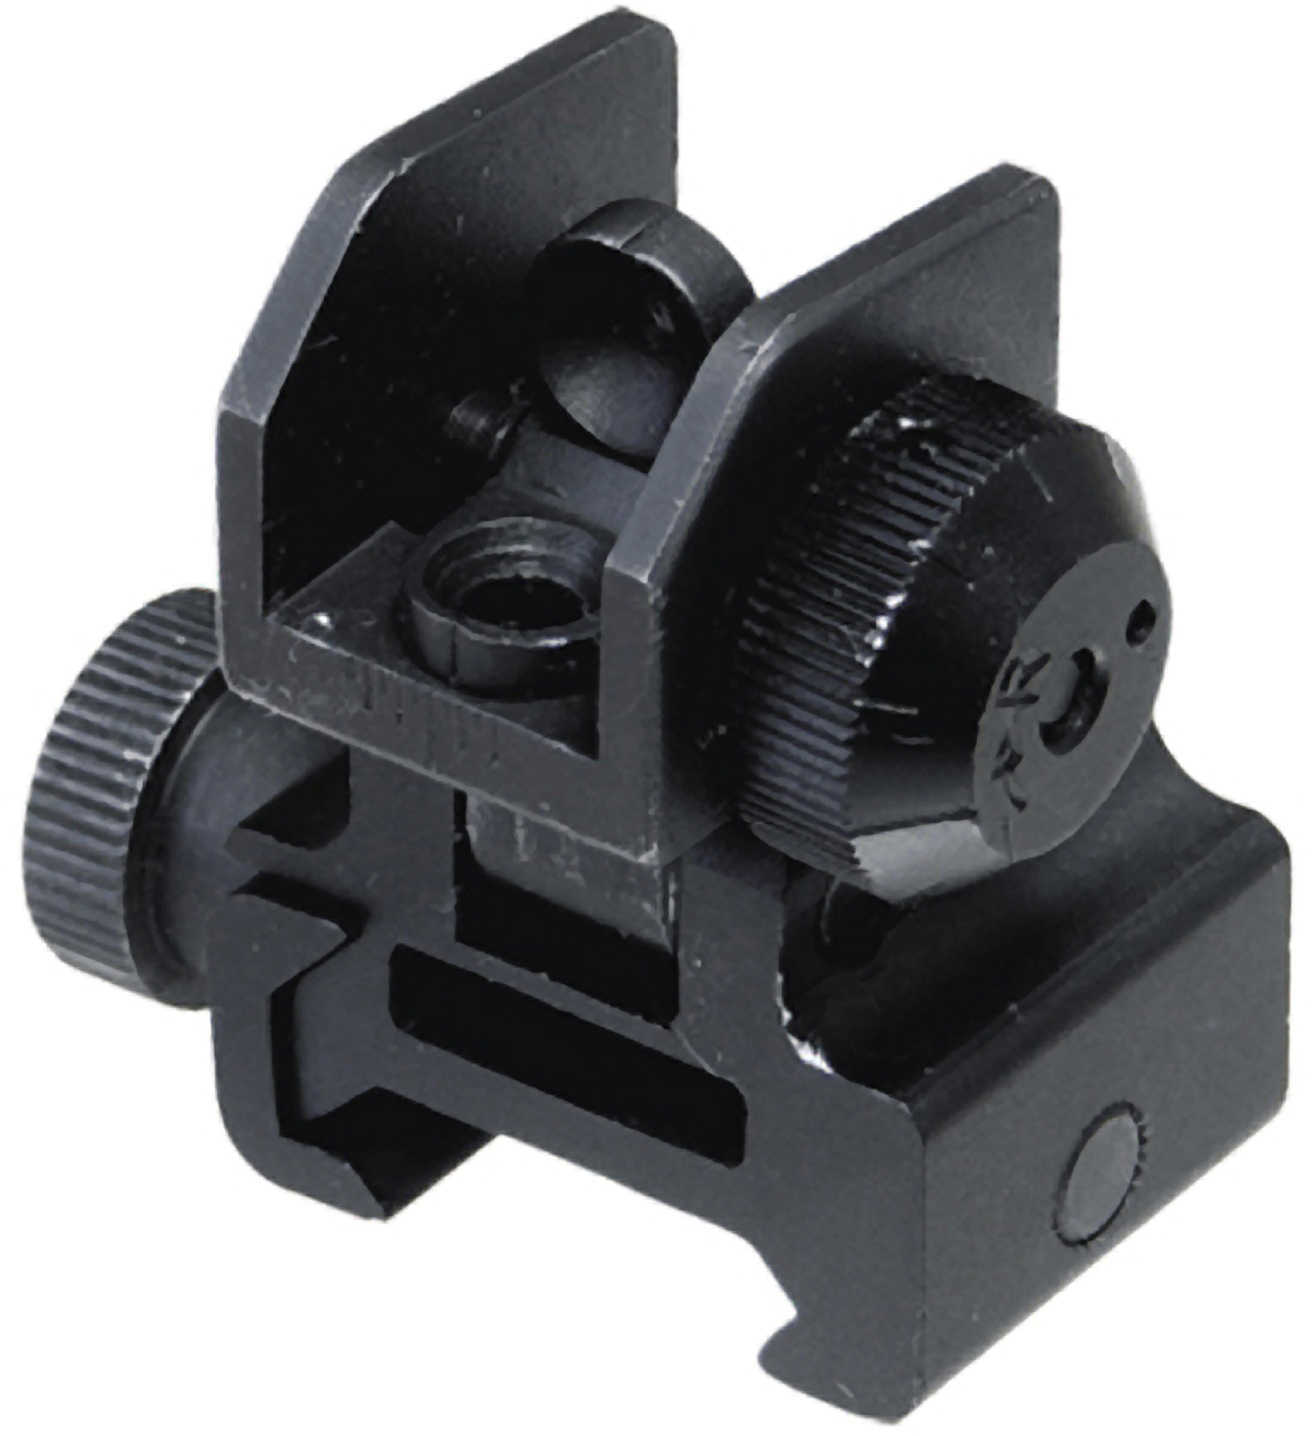 Leapers UTG Flip-Up Rear Sight With Windage Adj & Dual Aiming Apertures Md: MNT951